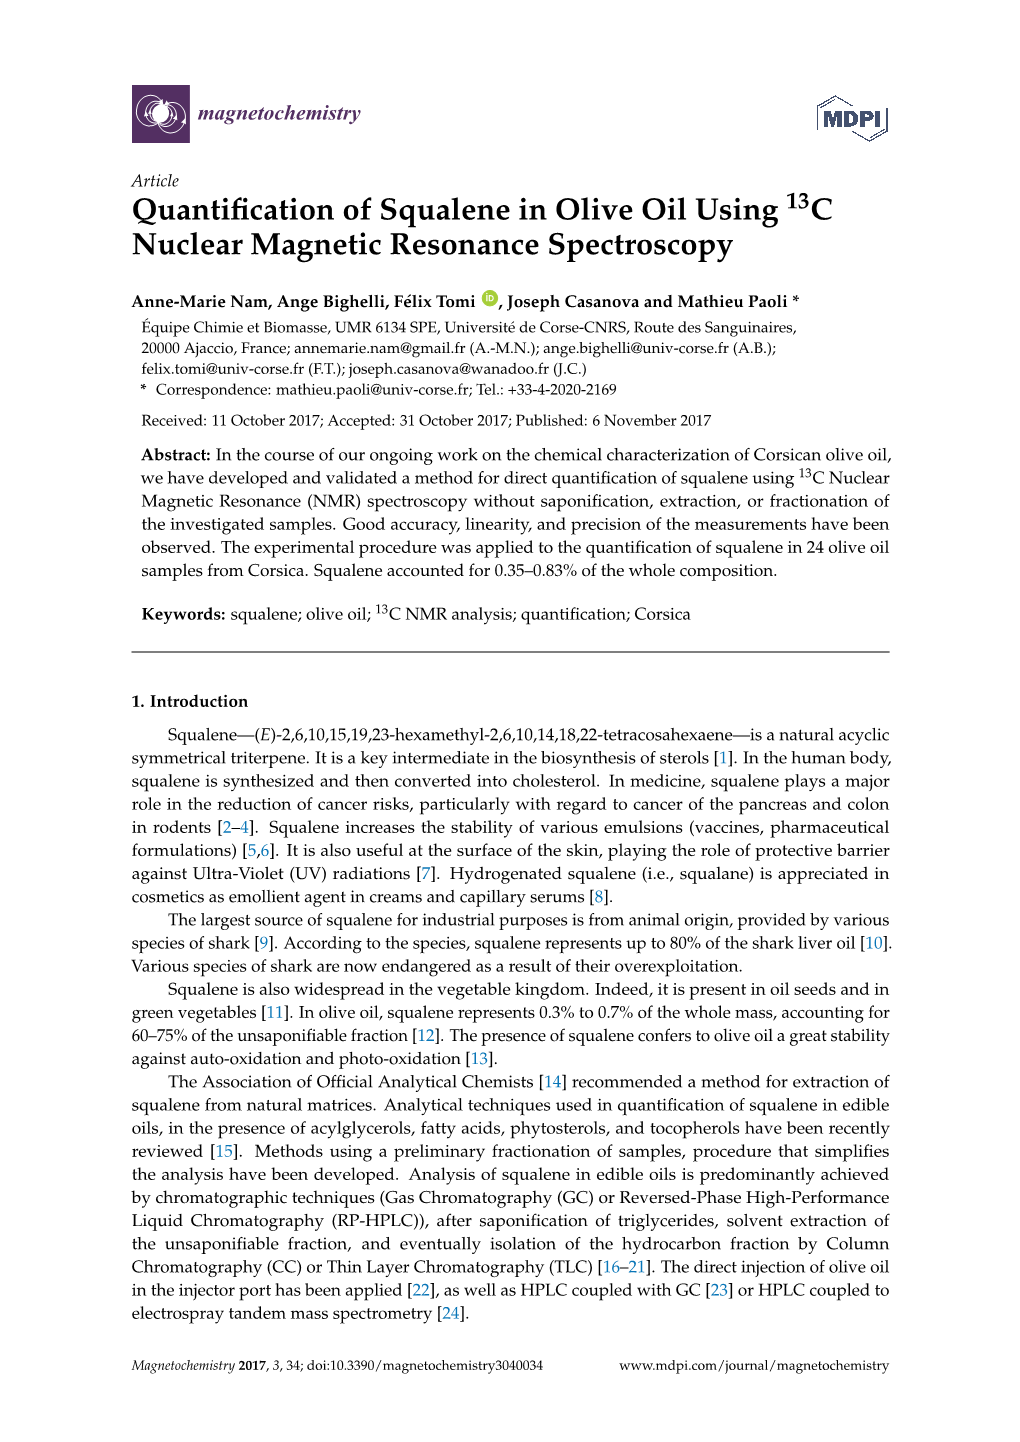 Quantification of Squalene in Olive Oil Using 13C Nuclear Magnetic